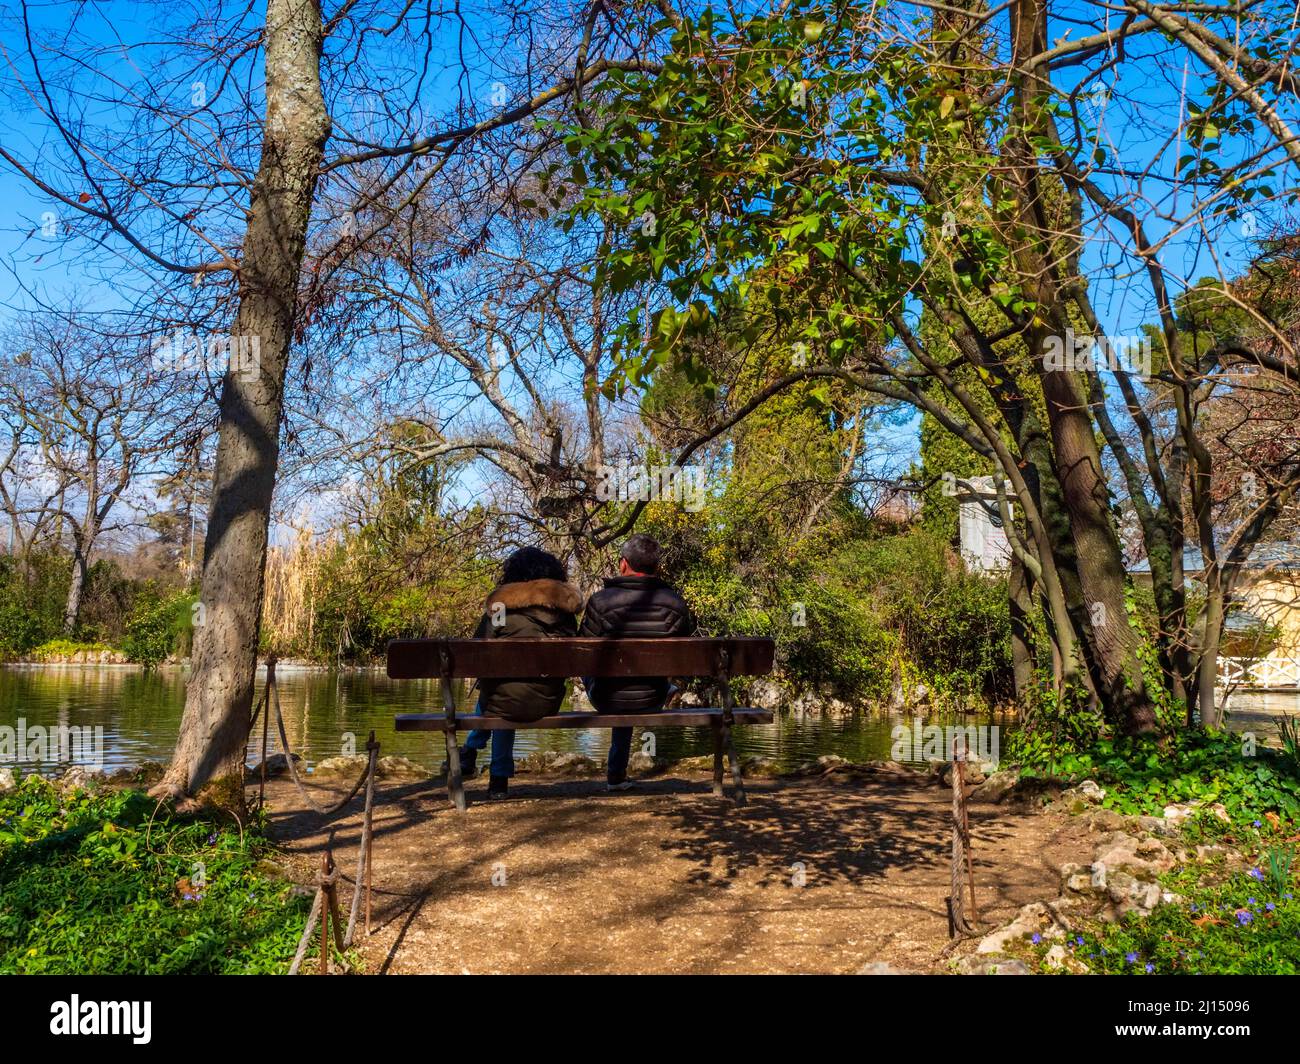 A heterosexual couple sitting under the trees on a public bench in a park in Madrid. Stock Photo